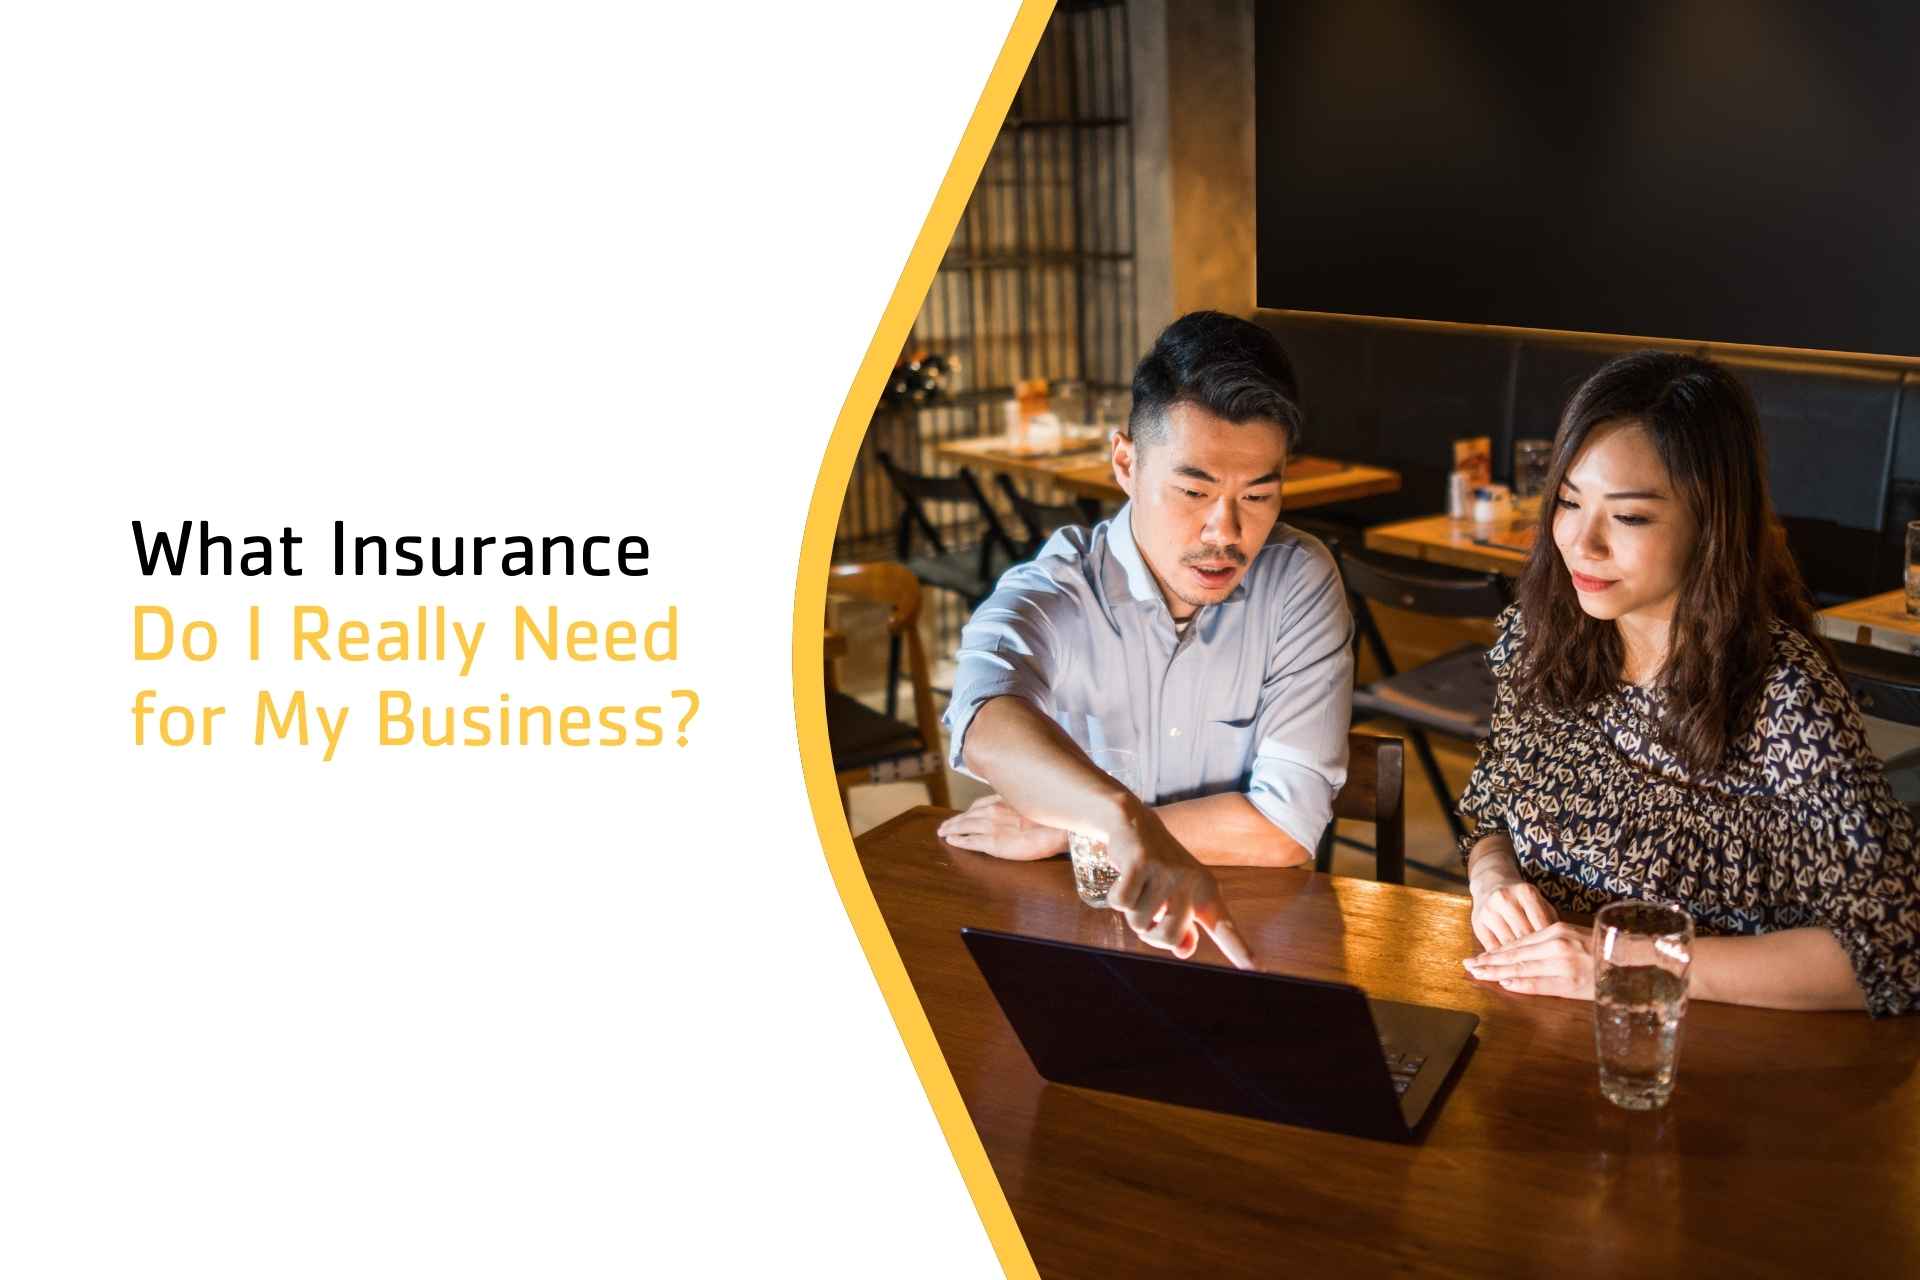 What Insurance Do I Really Need for My Business?